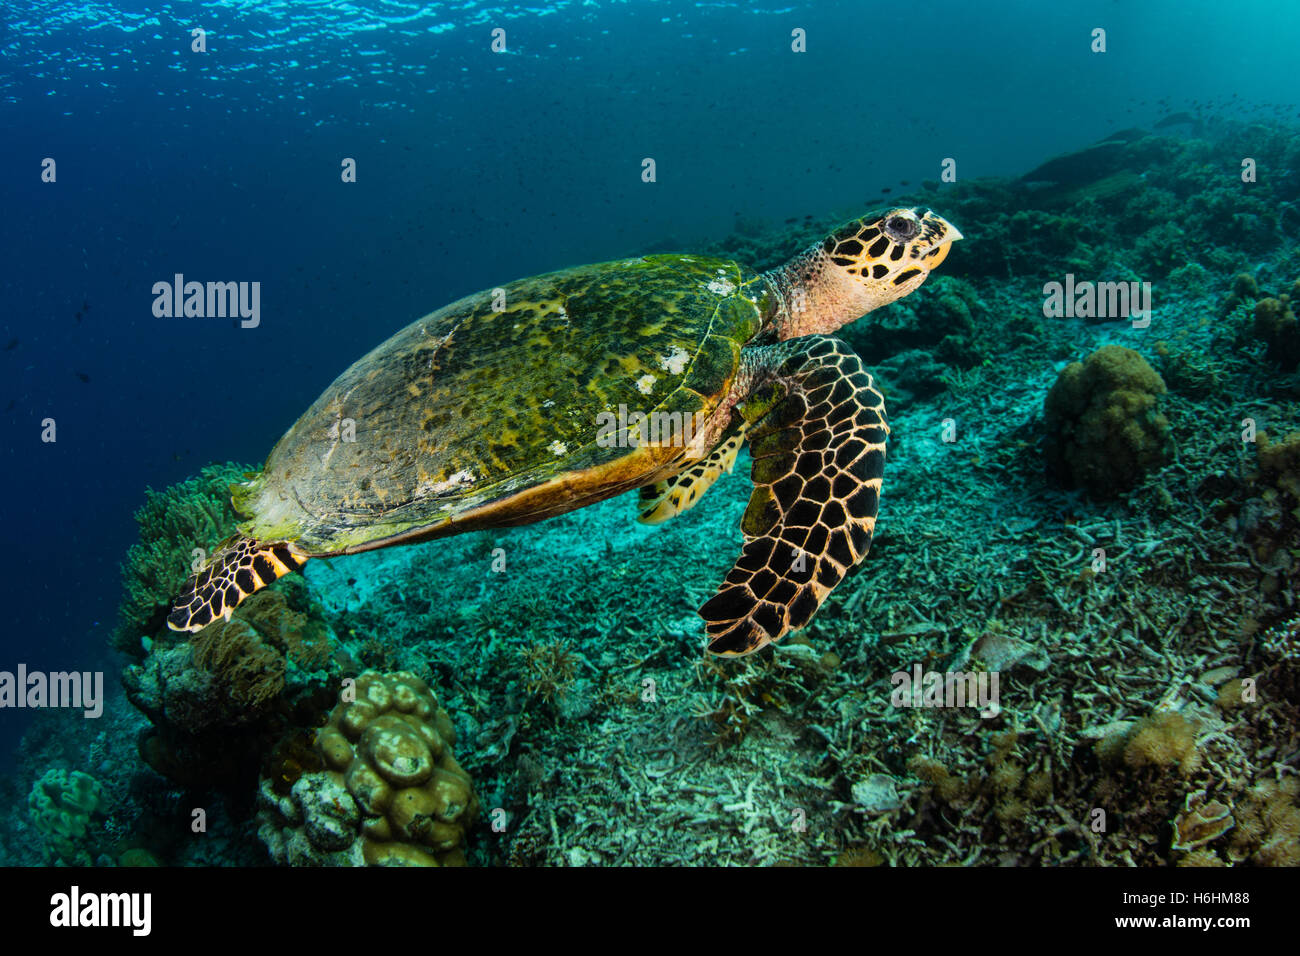 A Hawksbill sea turtle (Eretmochelys imbricata) swims over a coral reef in Indonesia. This reptile is an endangered species. Stock Photo